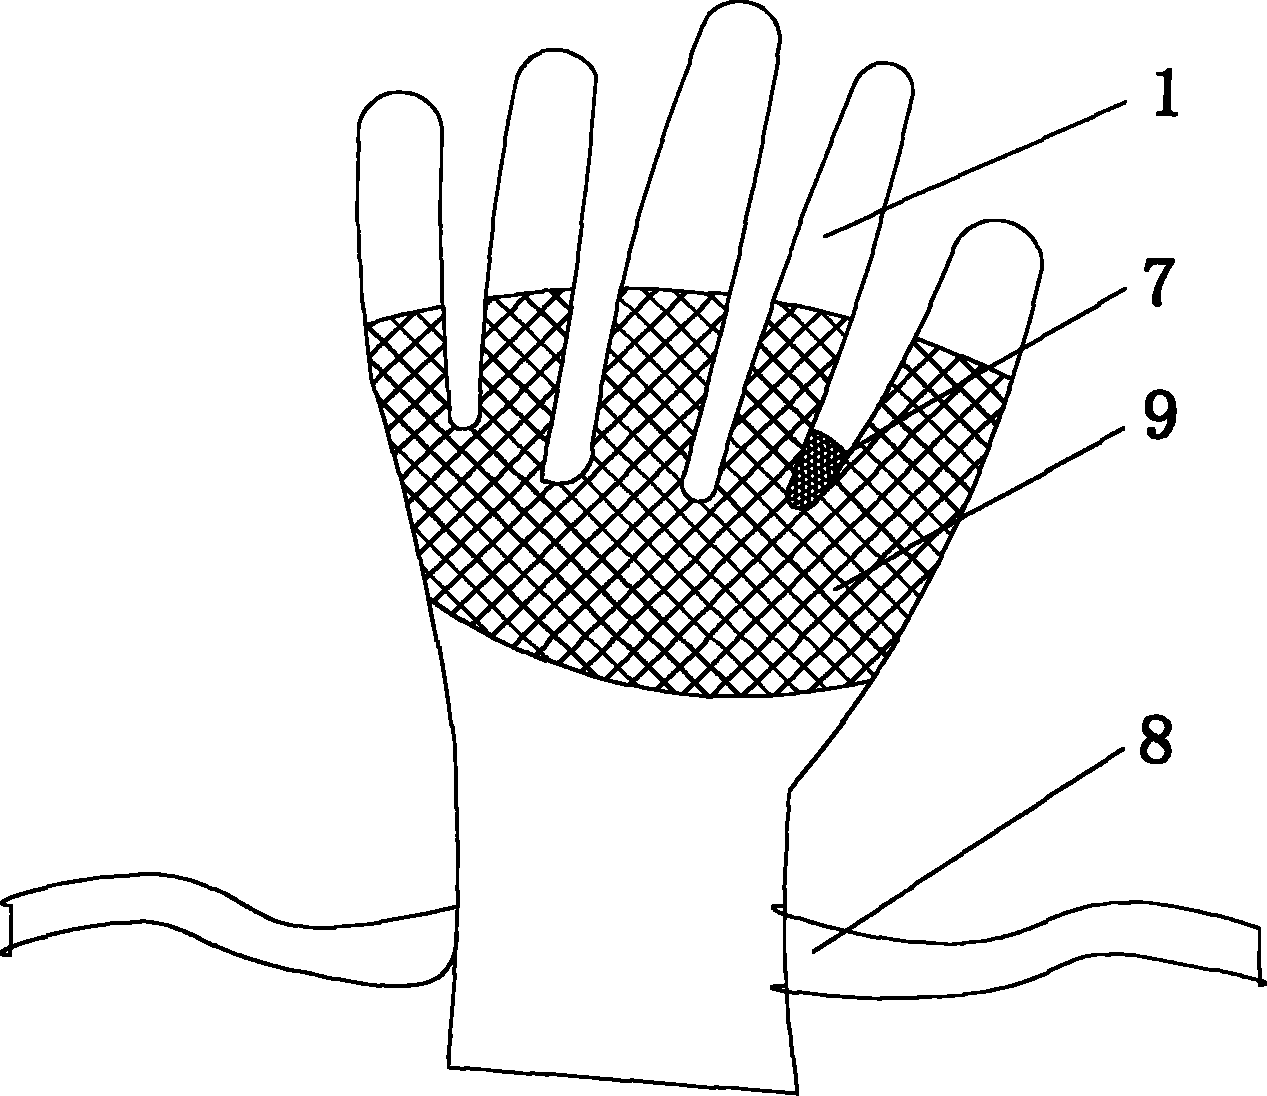 High temperature-resistant protective gloves